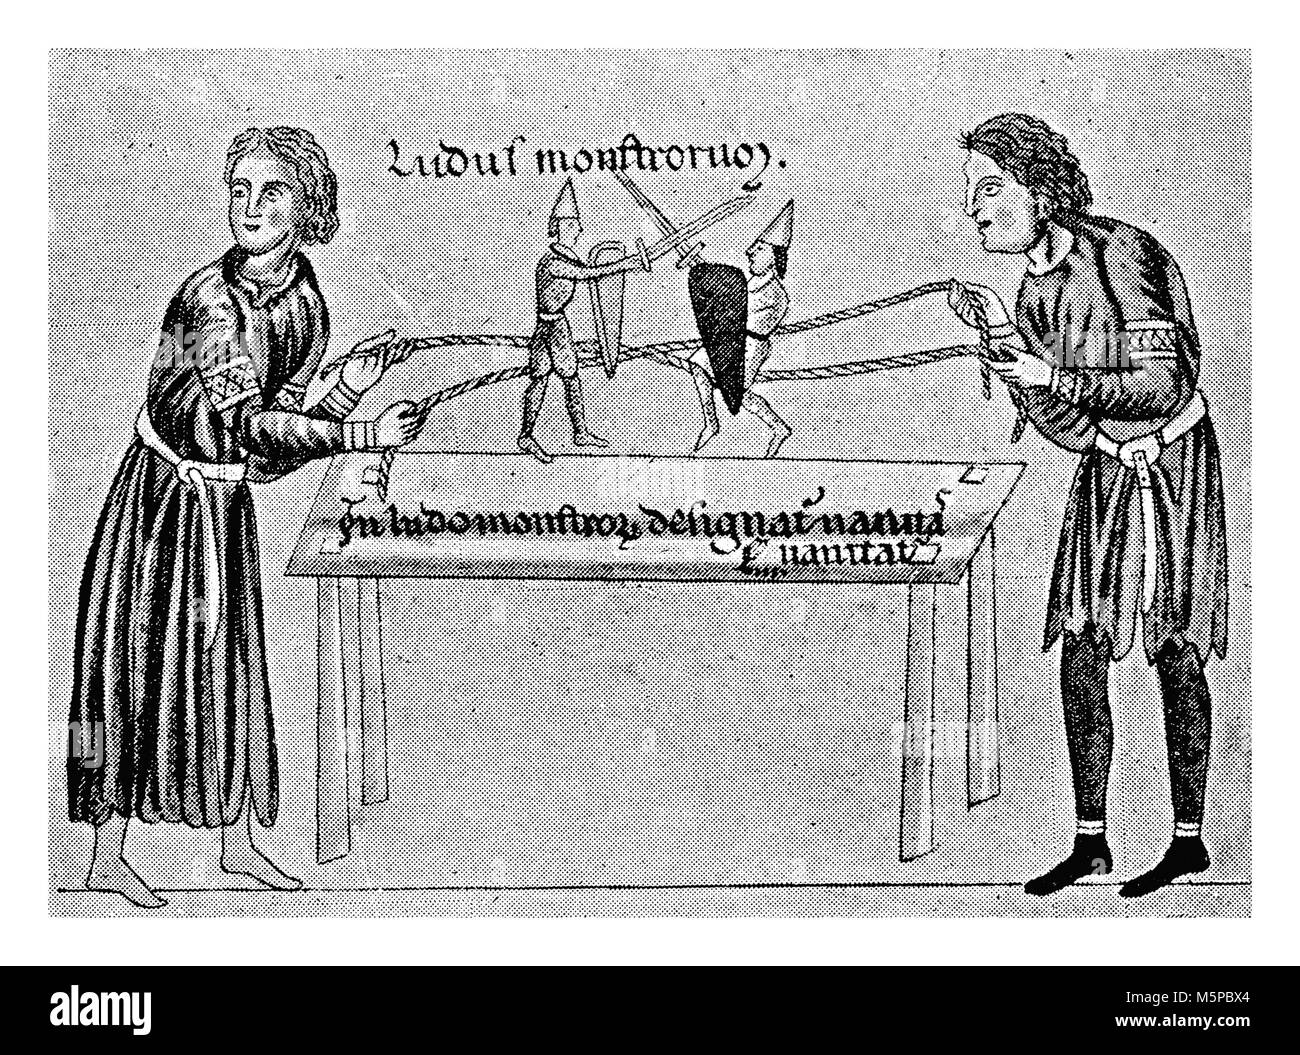 Young fashionable nobles playing with warrior puppets, XIII century illustration Stock Photo